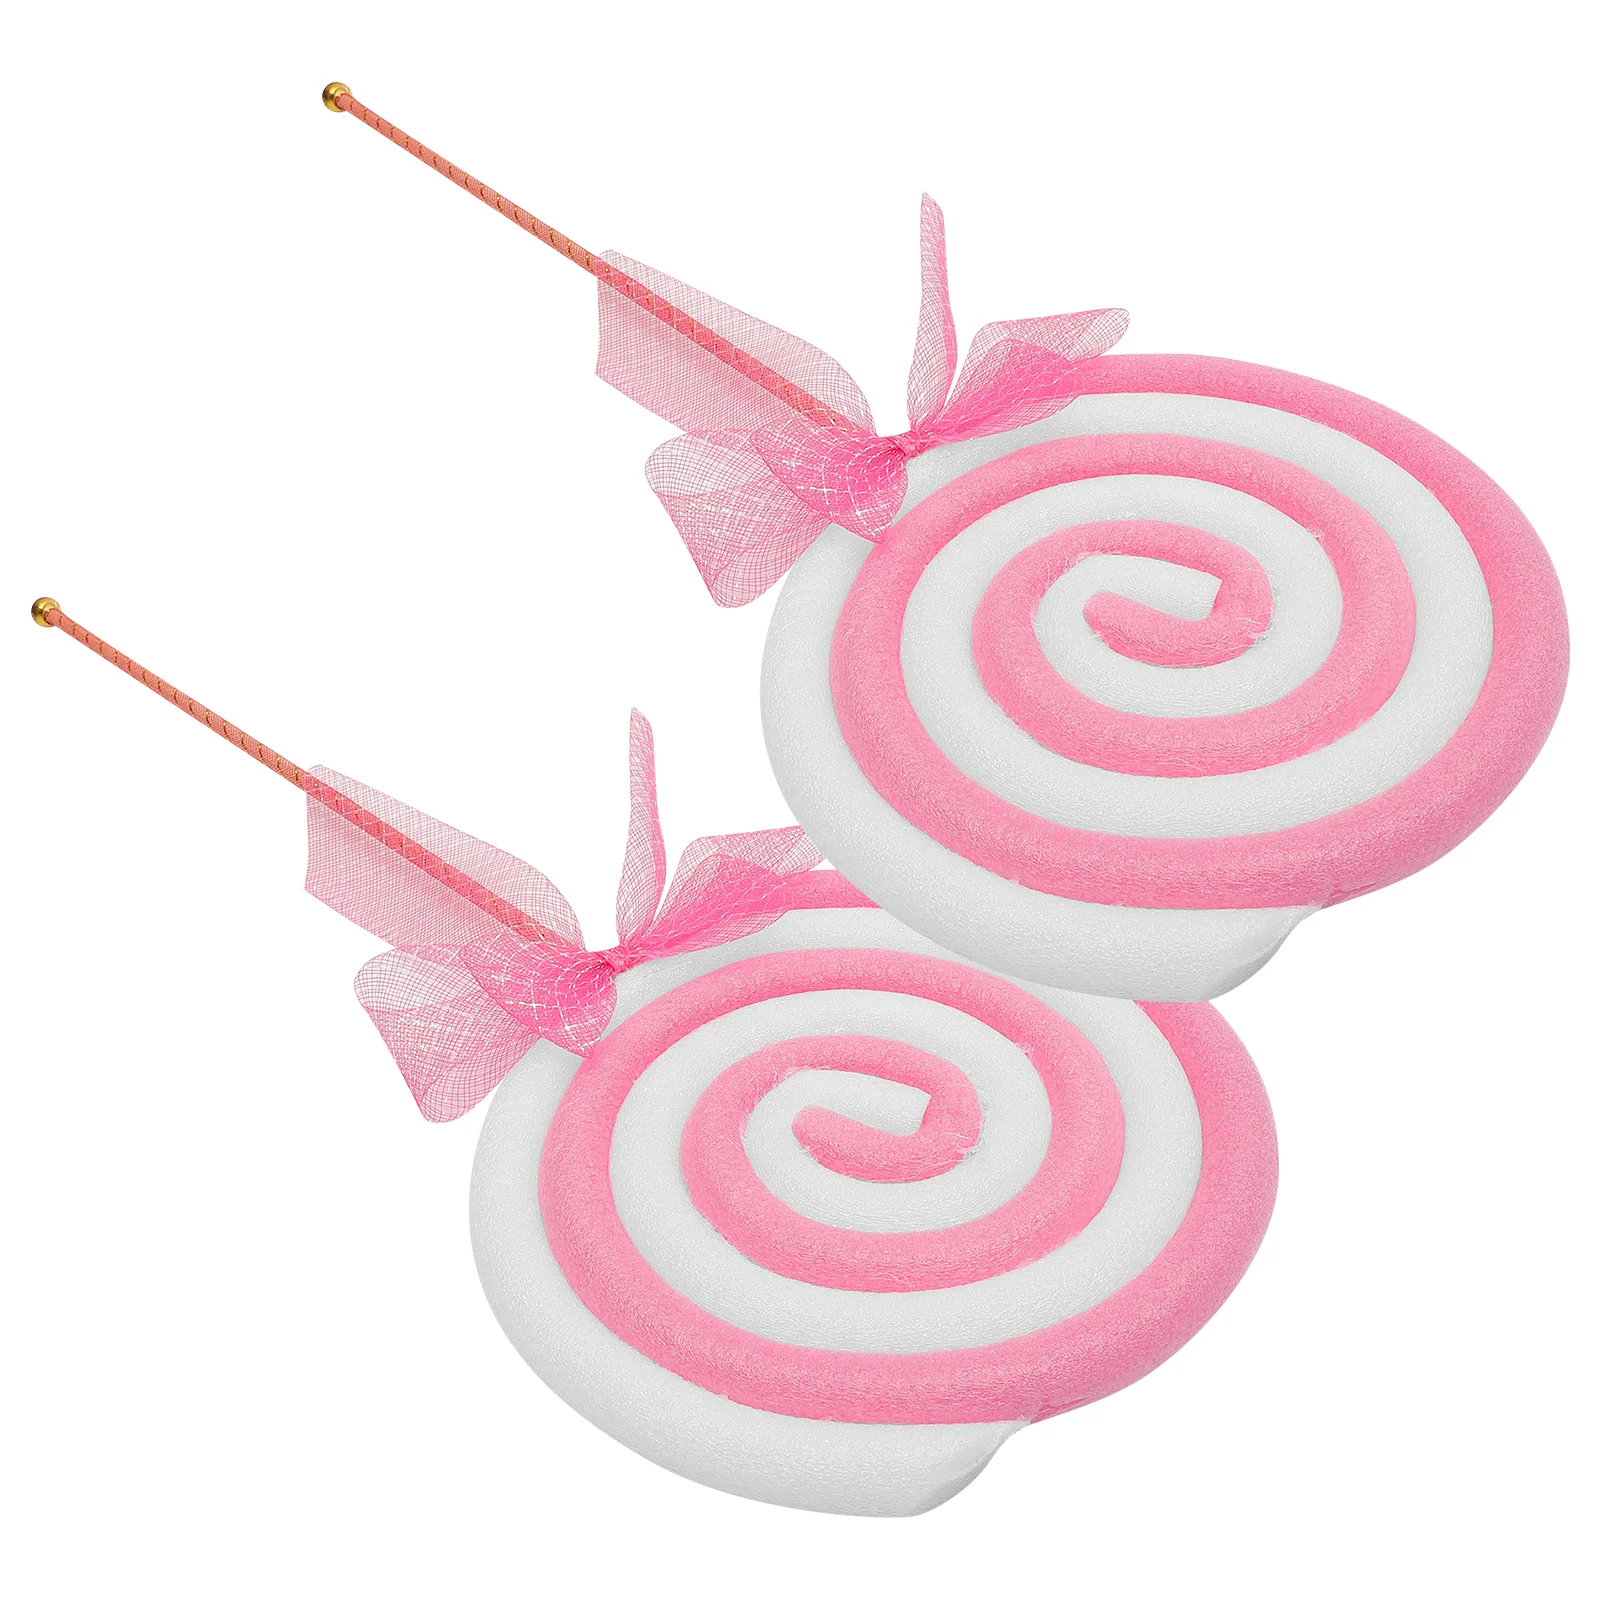 

2 Pcs Lollipop Props Decorative Fake Models Simulated Food Simulation Rounded Lollipops Party Candy Decoration Toy